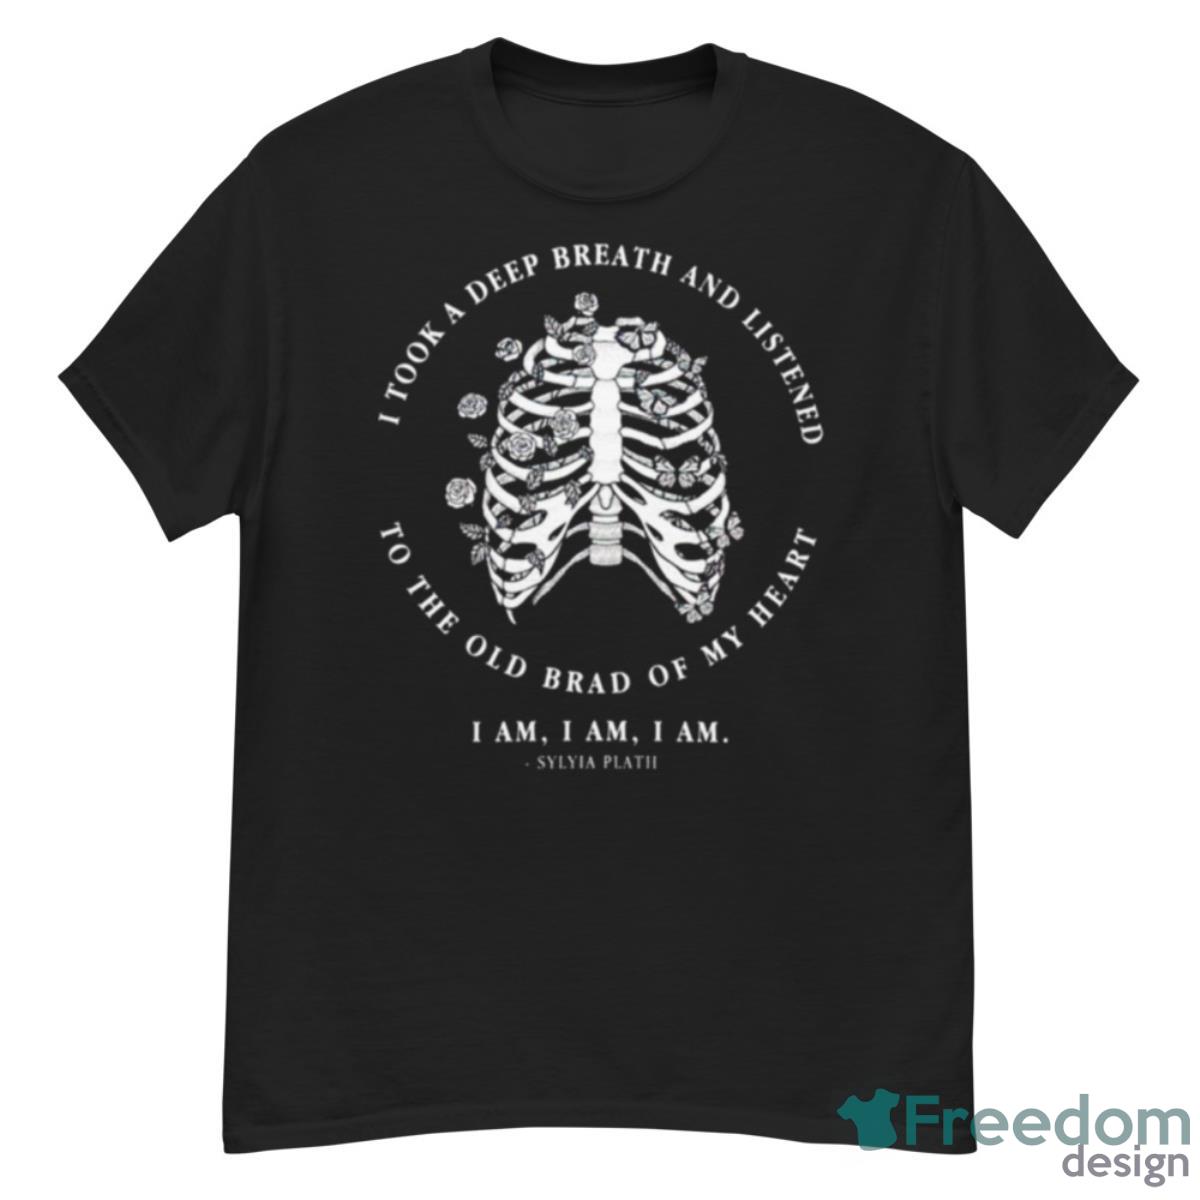 I Took A Deep Breath And Listened To The Old Brad Of My Heart Shirt - G500 Men’s Classic T-Shirt